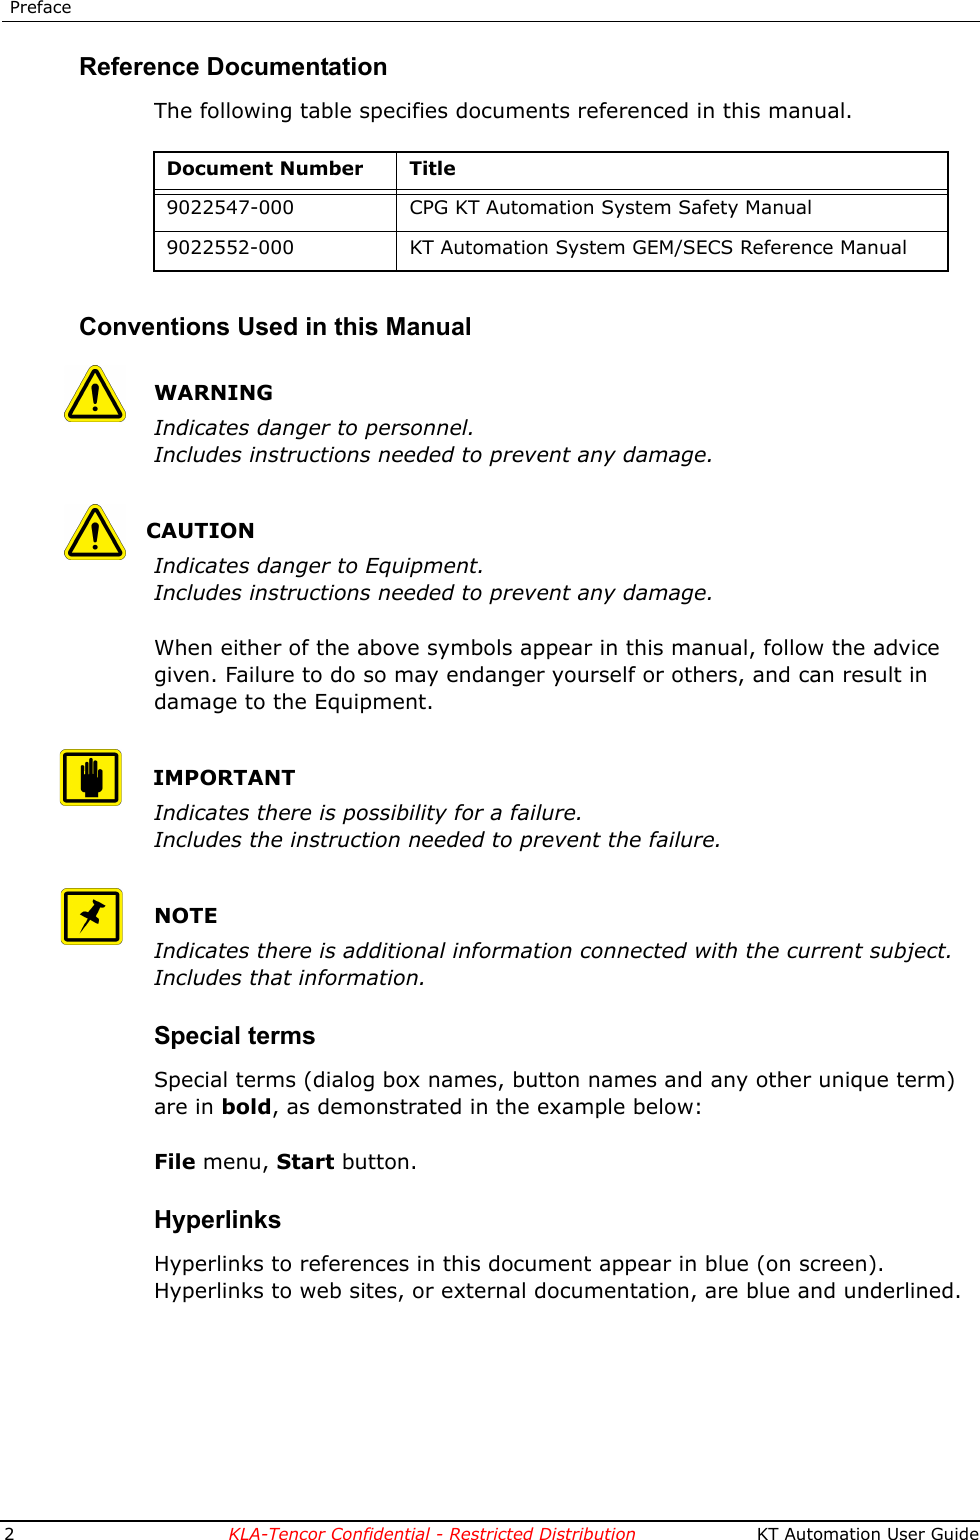  Preface2KLA-Tencor Confidential - Restricted Distribution  KT Automation User GuideReference DocumentationThe following table specifies documents referenced in this manual.Conventions Used in this ManualWARNINGIndicates danger to personnel.Includes instructions needed to prevent any damage.CAUTIONIndicates danger to Equipment.Includes instructions needed to prevent any damage.When either of the above symbols appear in this manual, follow the advice given. Failure to do so may endanger yourself or others, and can result in damage to the Equipment.IMPORTANTIndicates there is possibility for a failure.Includes the instruction needed to prevent the failure.NOTEIndicates there is additional information connected with the current subject.Includes that information.Special termsSpecial terms (dialog box names, button names and any other unique term) are in bold, as demonstrated in the example below:File menu, Start button.HyperlinksHyperlinks to references in this document appear in blue (on screen).Hyperlinks to web sites, or external documentation, are blue and underlined.Document Number Title9022547-000 CPG KT Automation System Safety Manual9022552-000 KT Automation System GEM/SECS Reference Manual